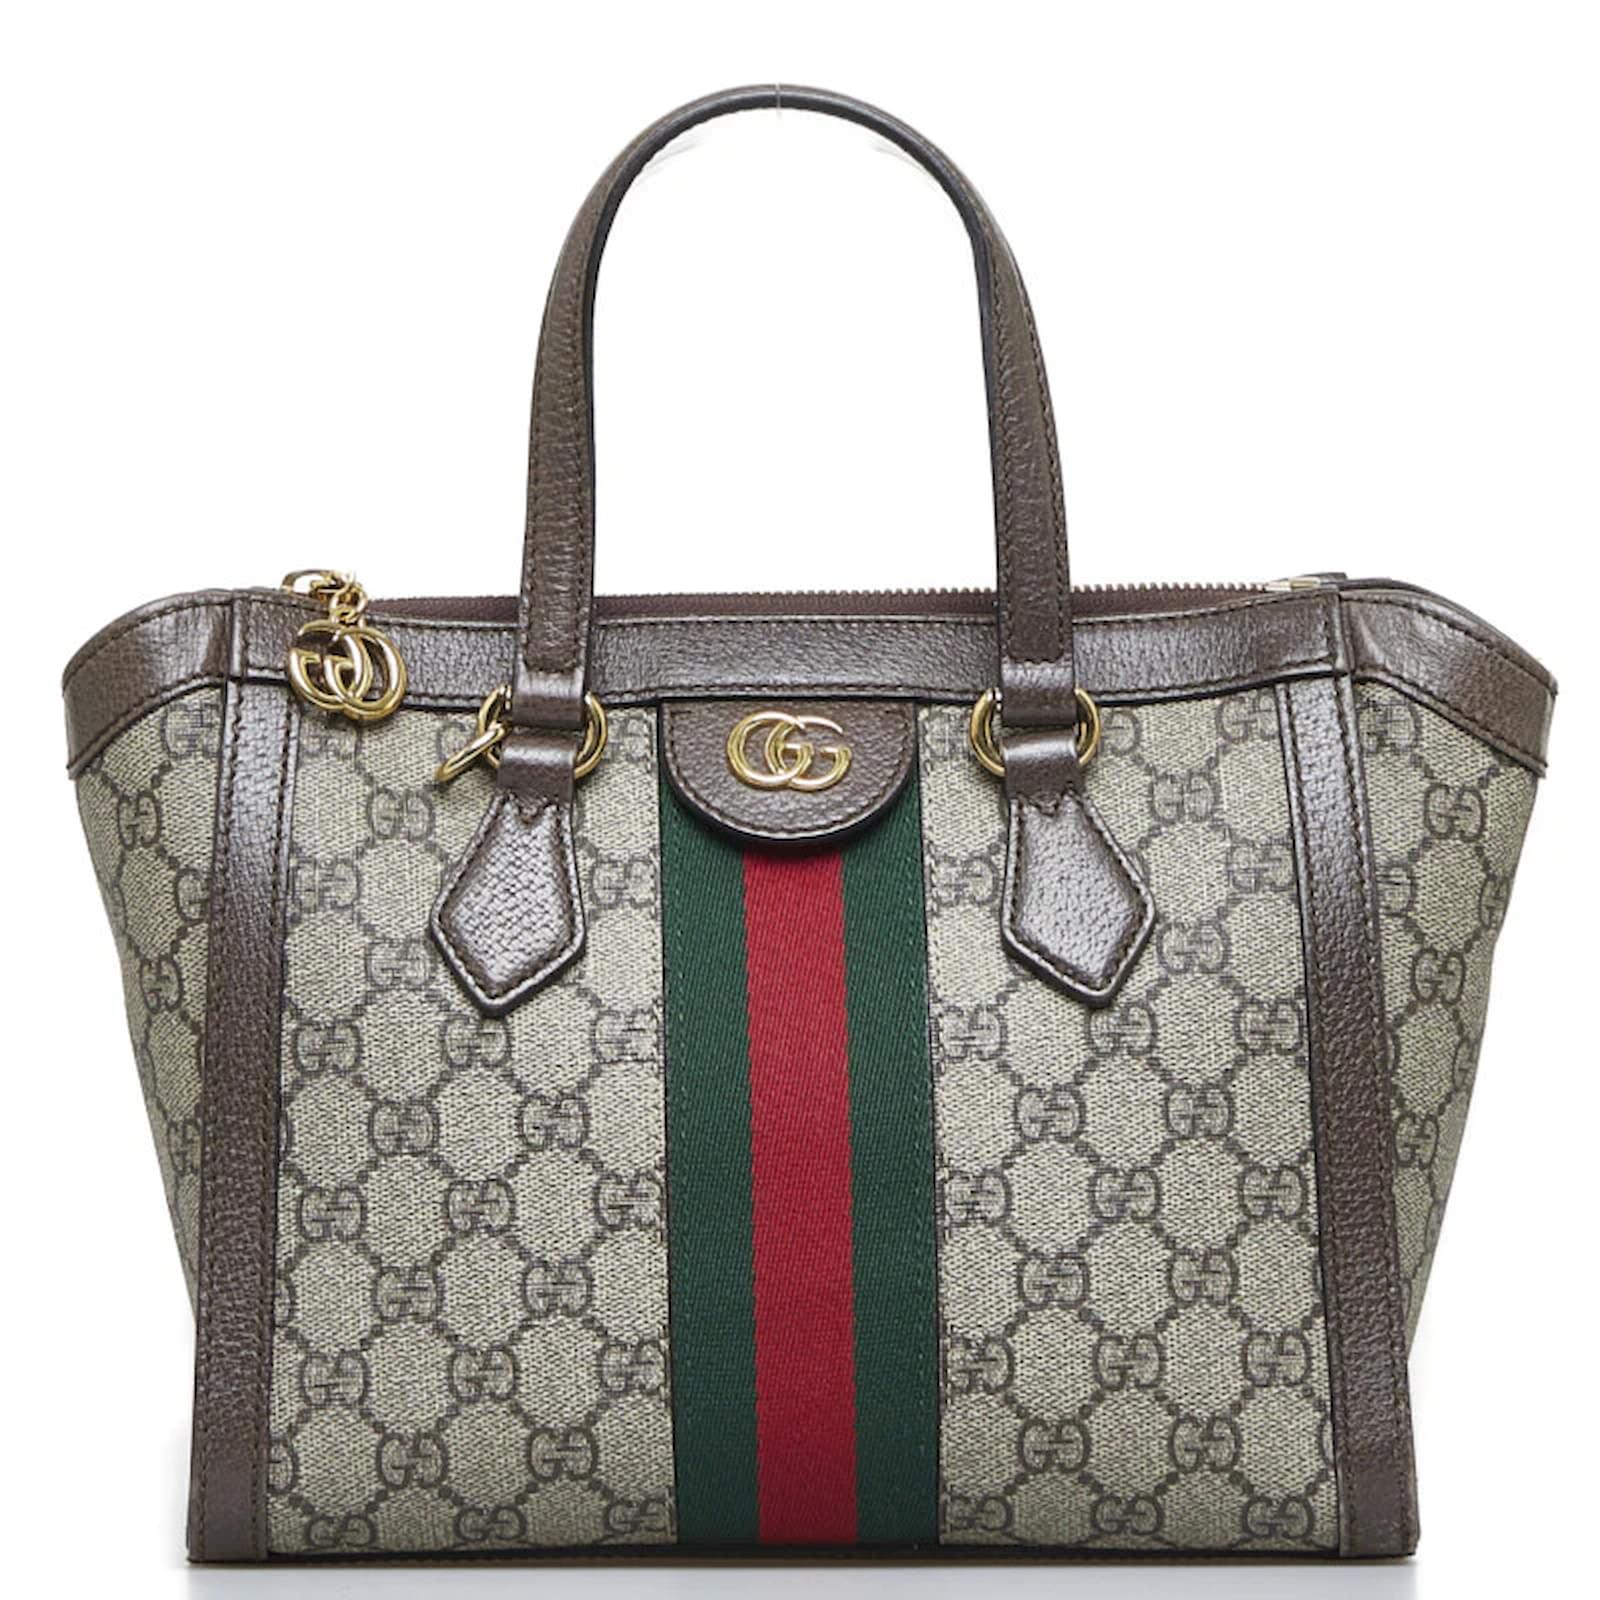 Ophidia Small GG Canvas Shoulder Bag in Beige - Gucci